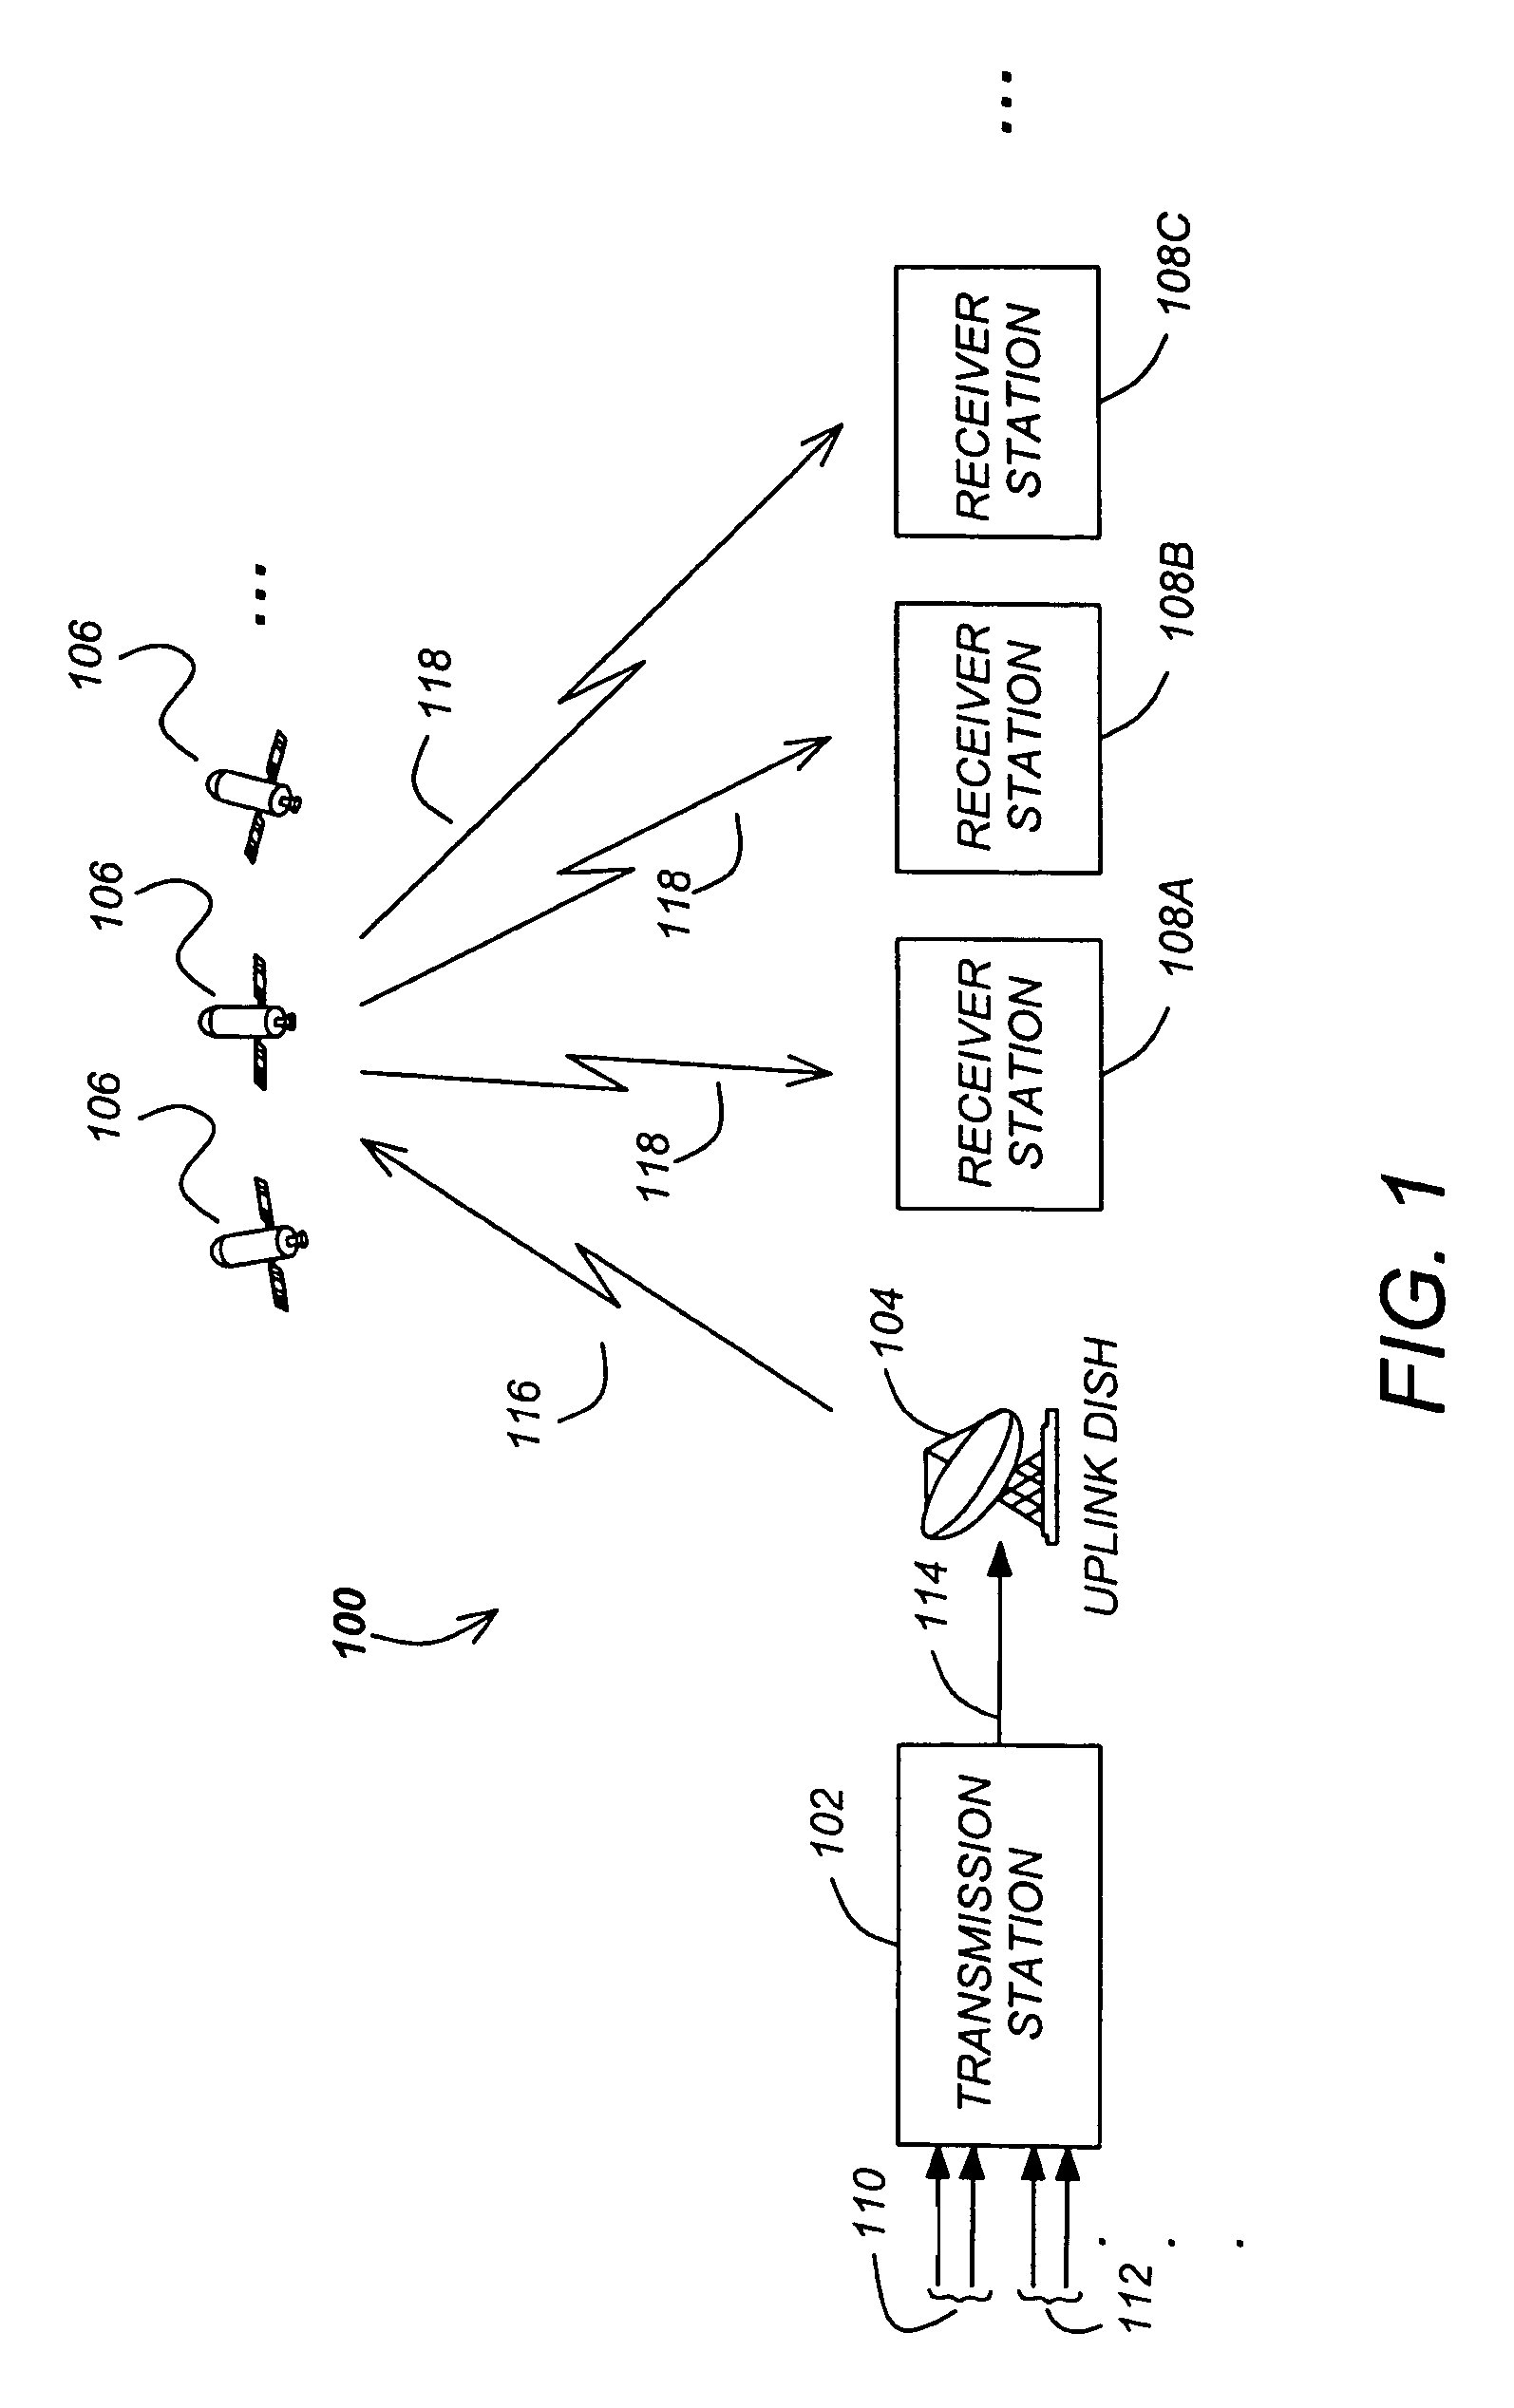 Methods and apparatuses for determining scrambling codes for signal transmission